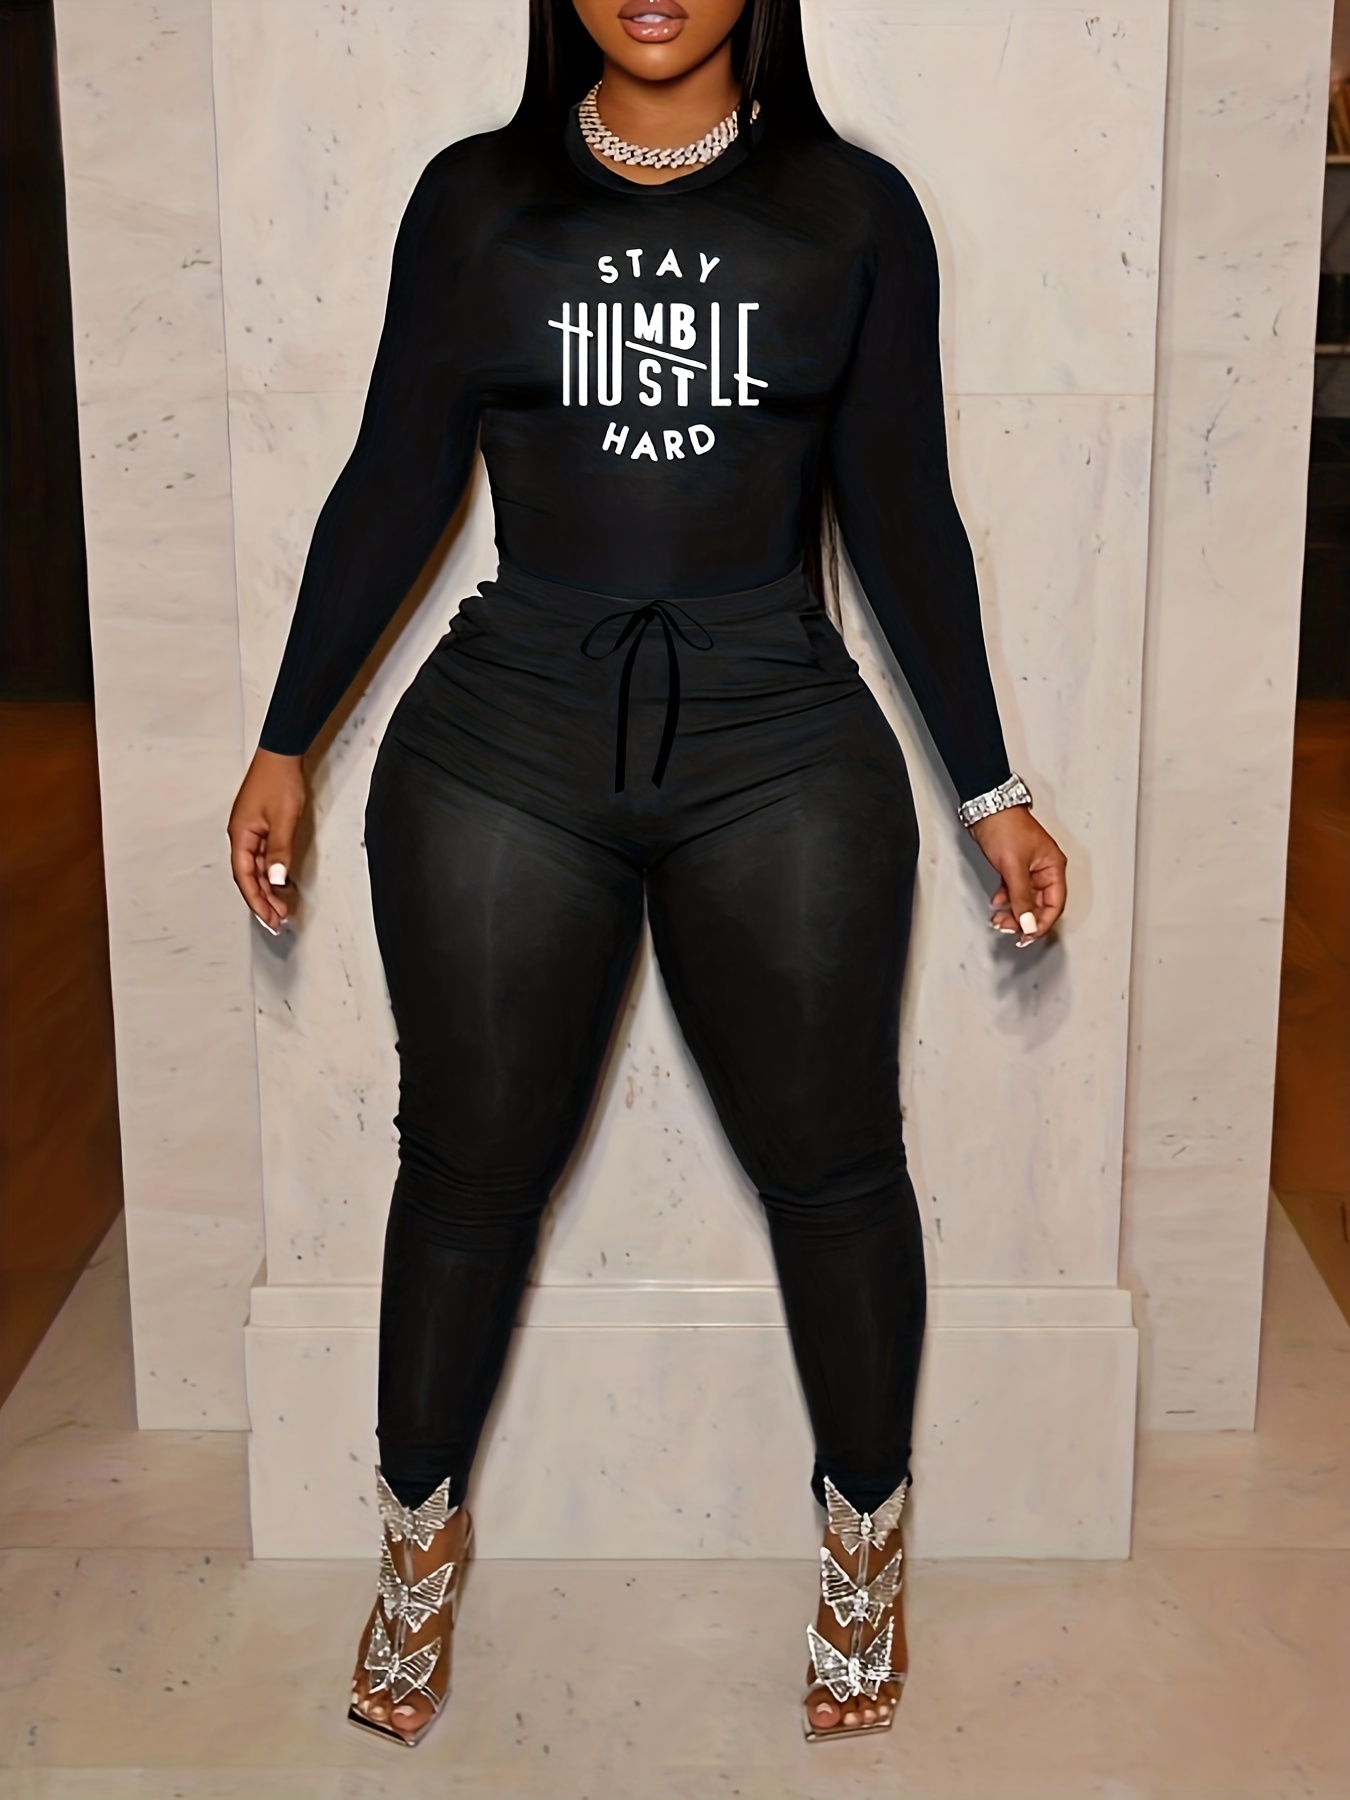 Black Plus Size Leggings – Strong and Humble Apparel